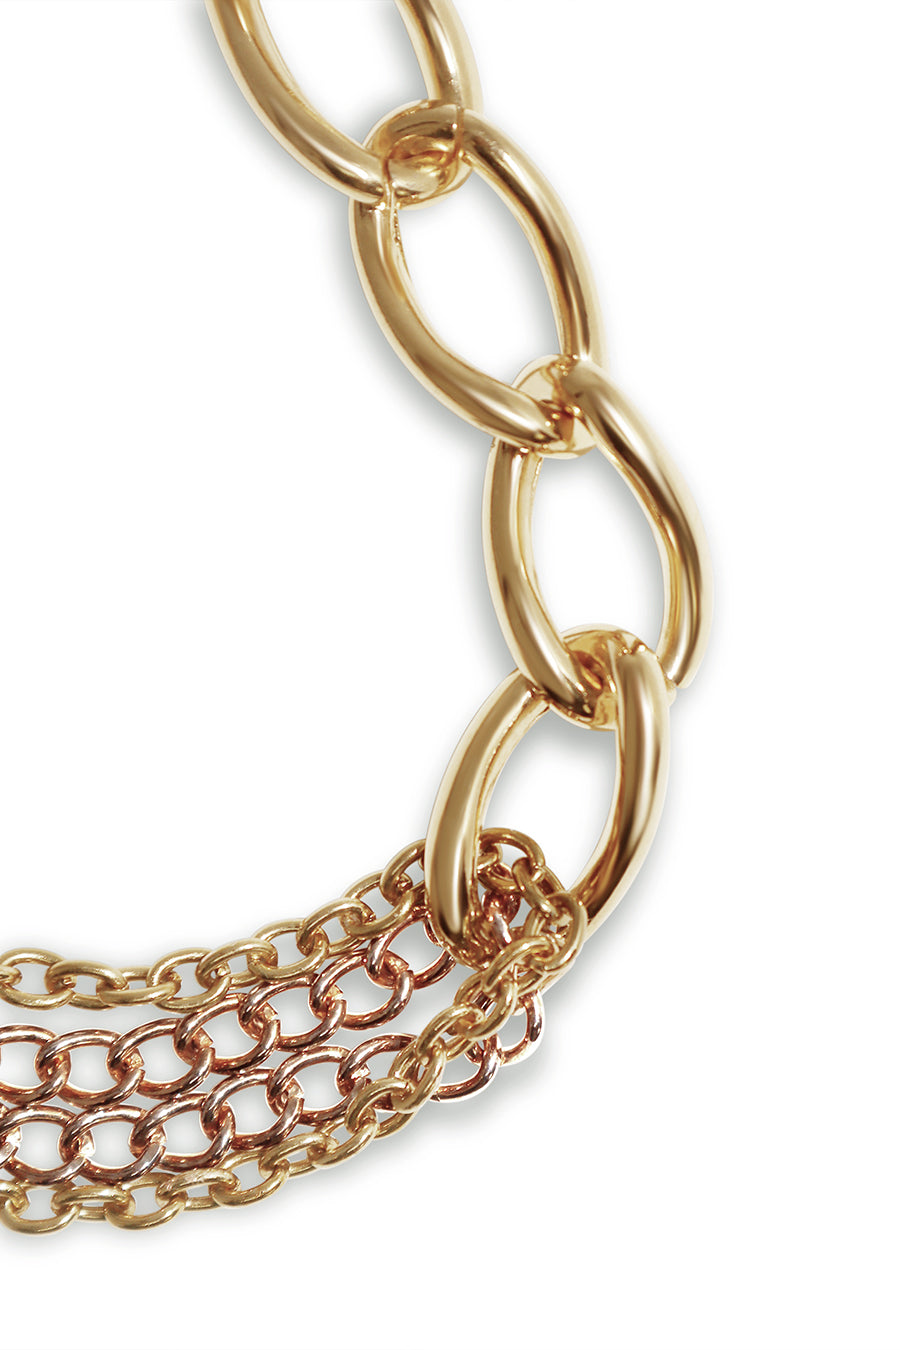 IK Plated Gold Chain close view